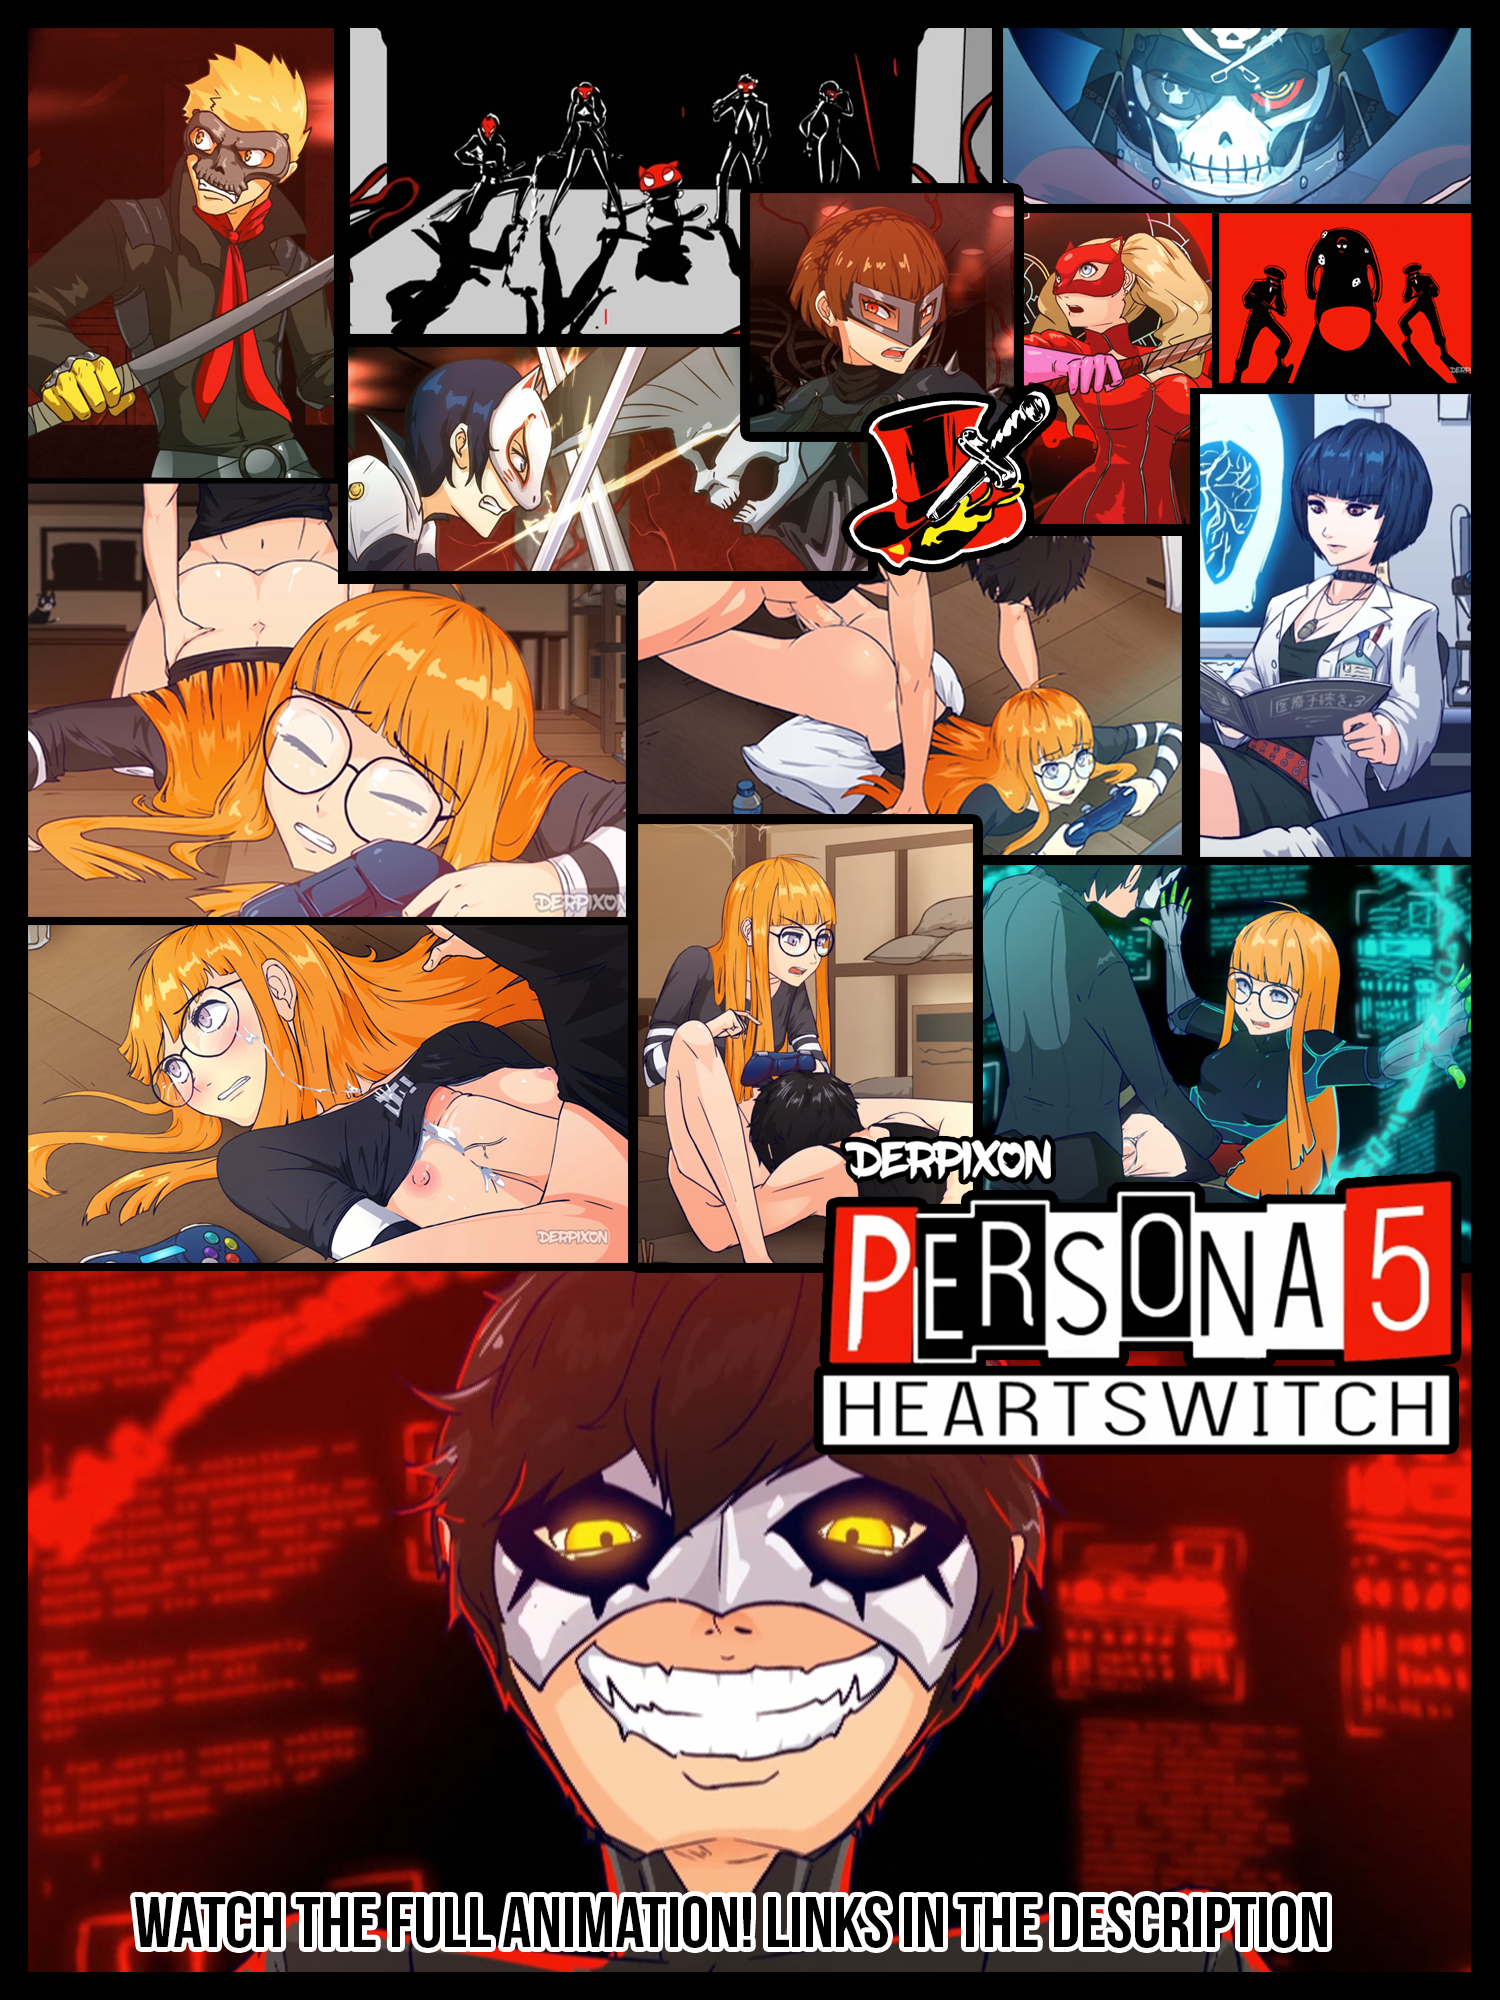 Persona 5 - heartswitch